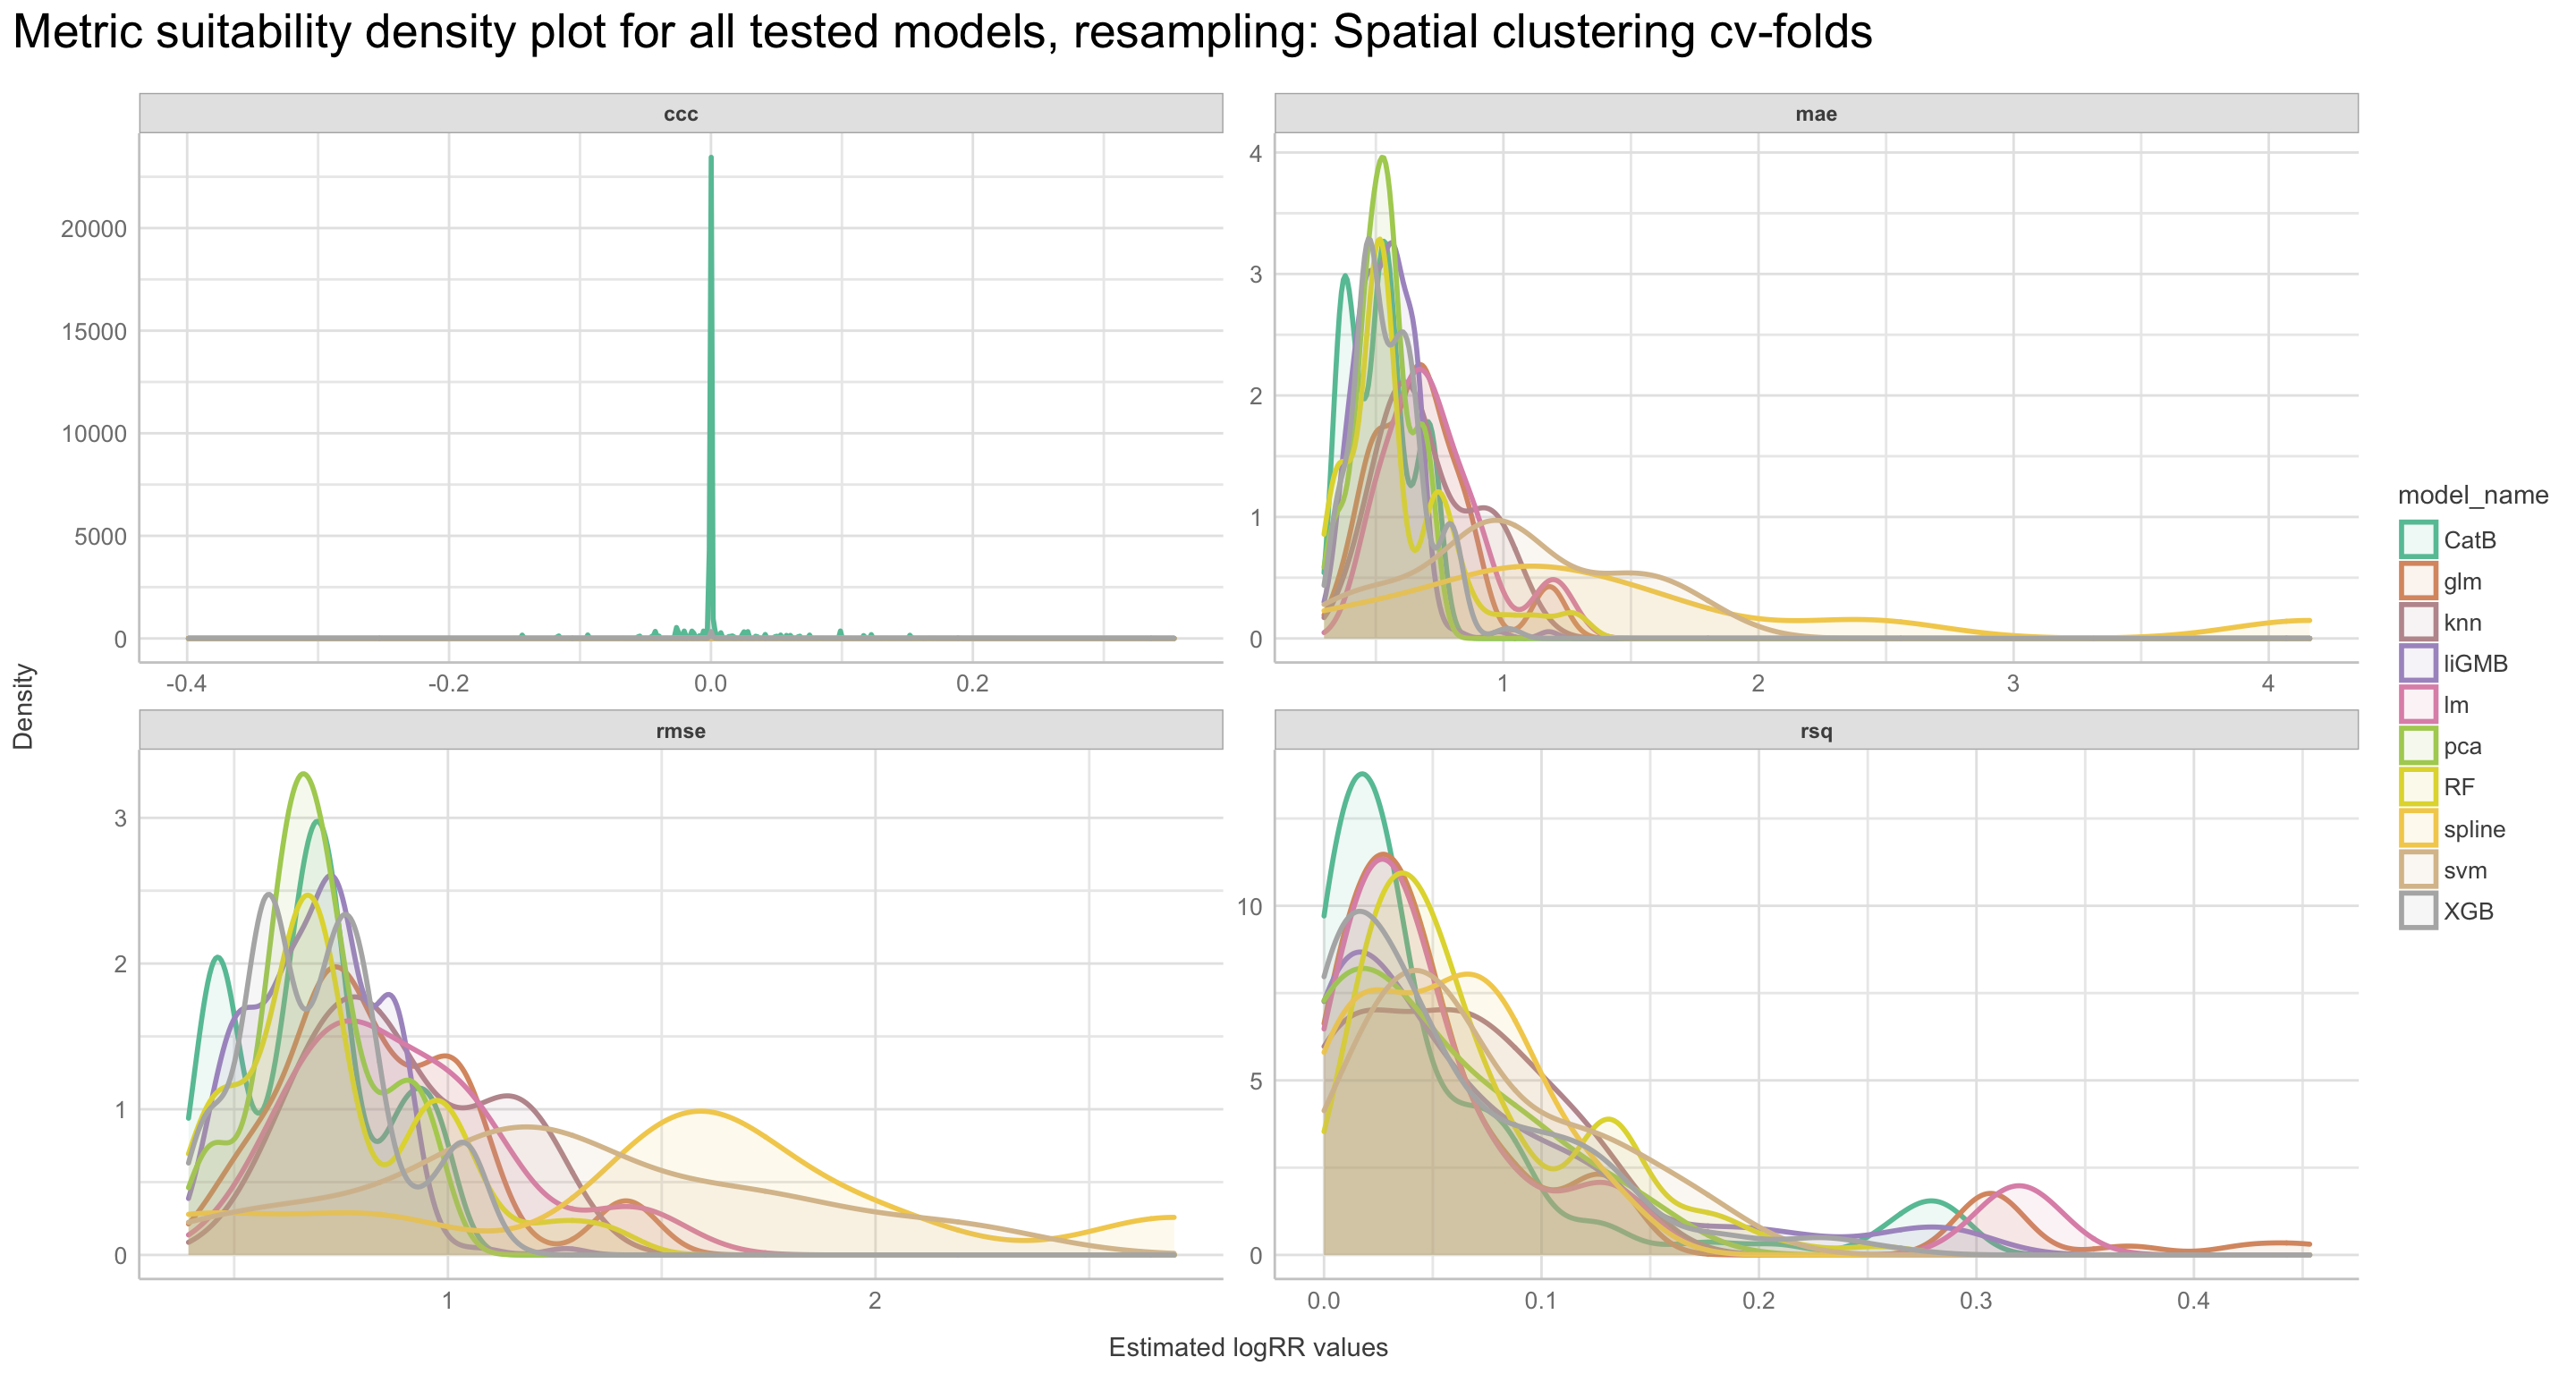 Density plot of metric suitability for all tested models, resampling: Spatial clustering cv-folds - metrics: CCC, RMSE, MAE, rsq